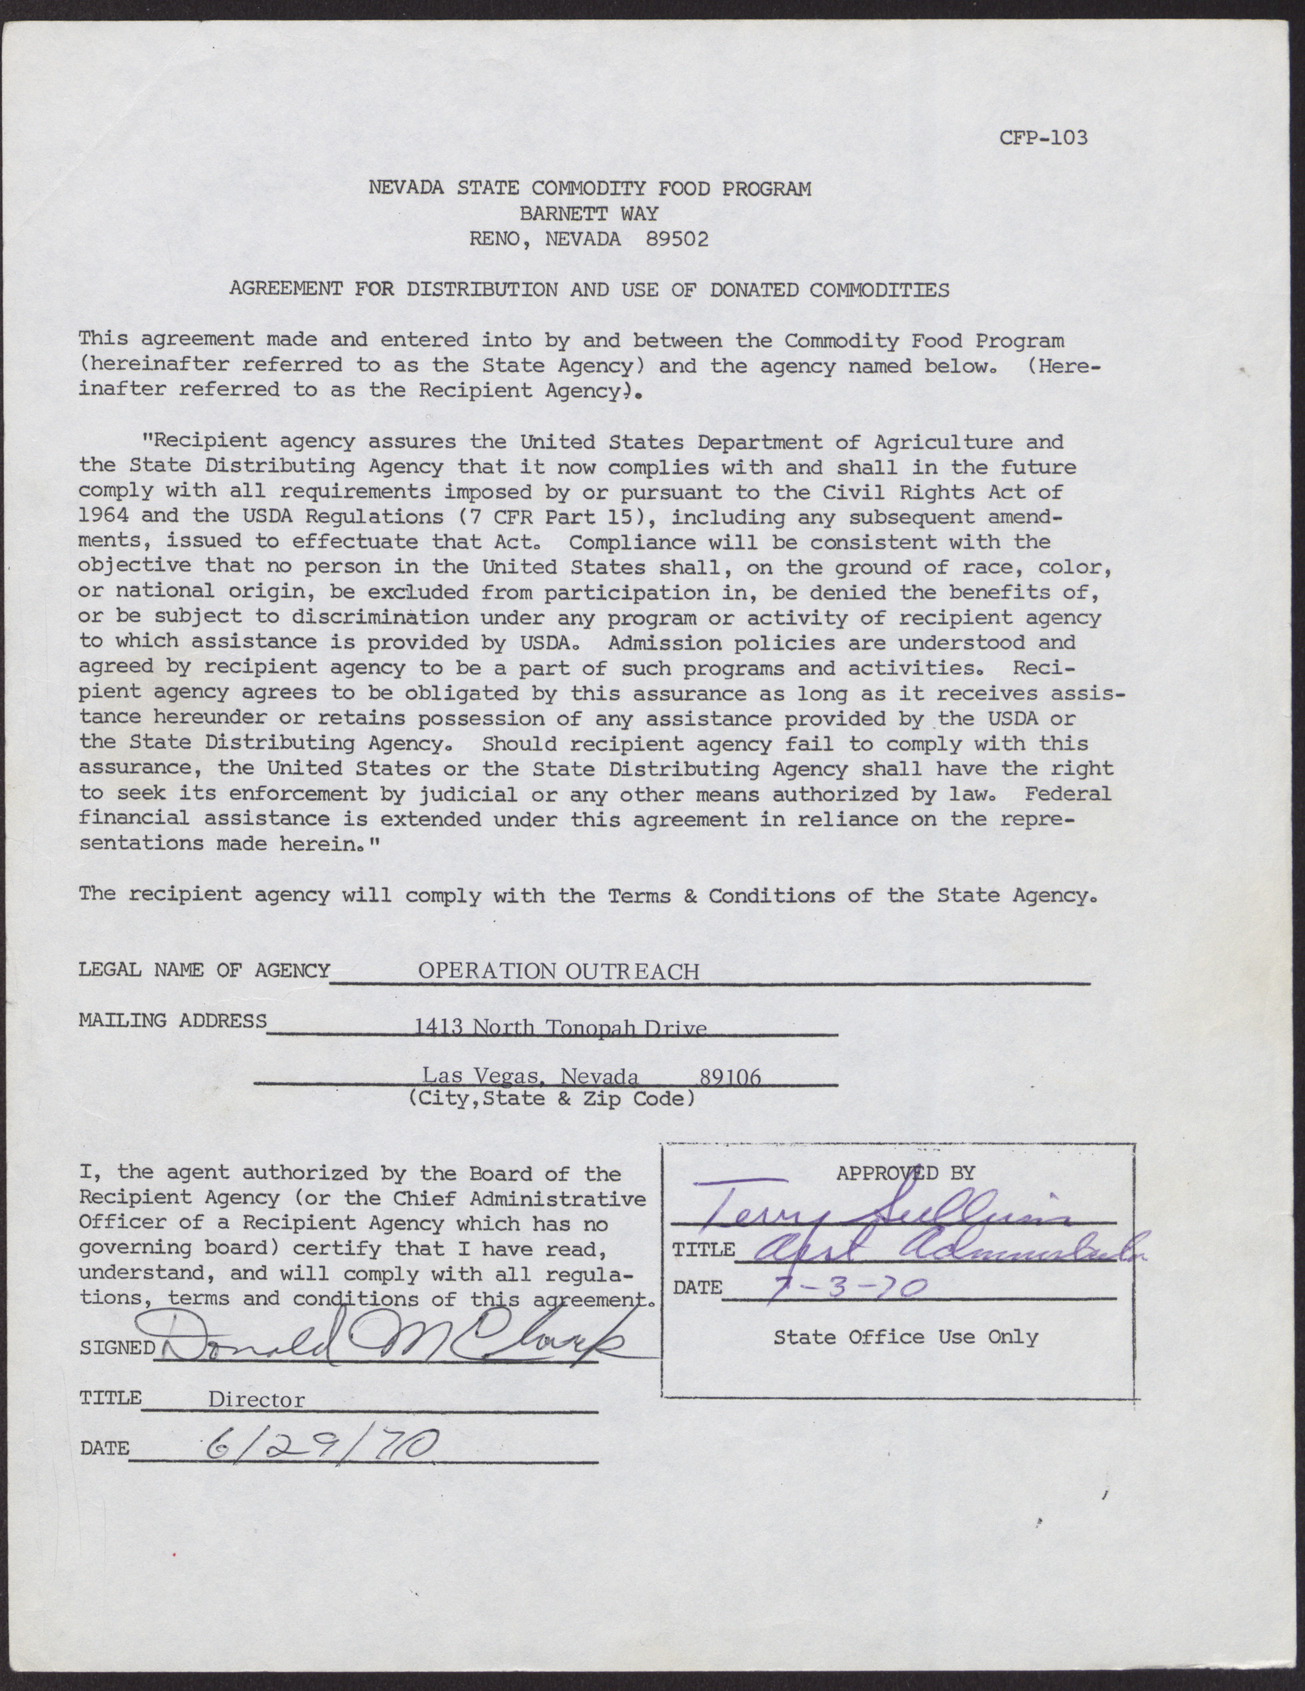 Contract of Agreement between the Commodity Food Program and Operation Outreach, June 29, 1970